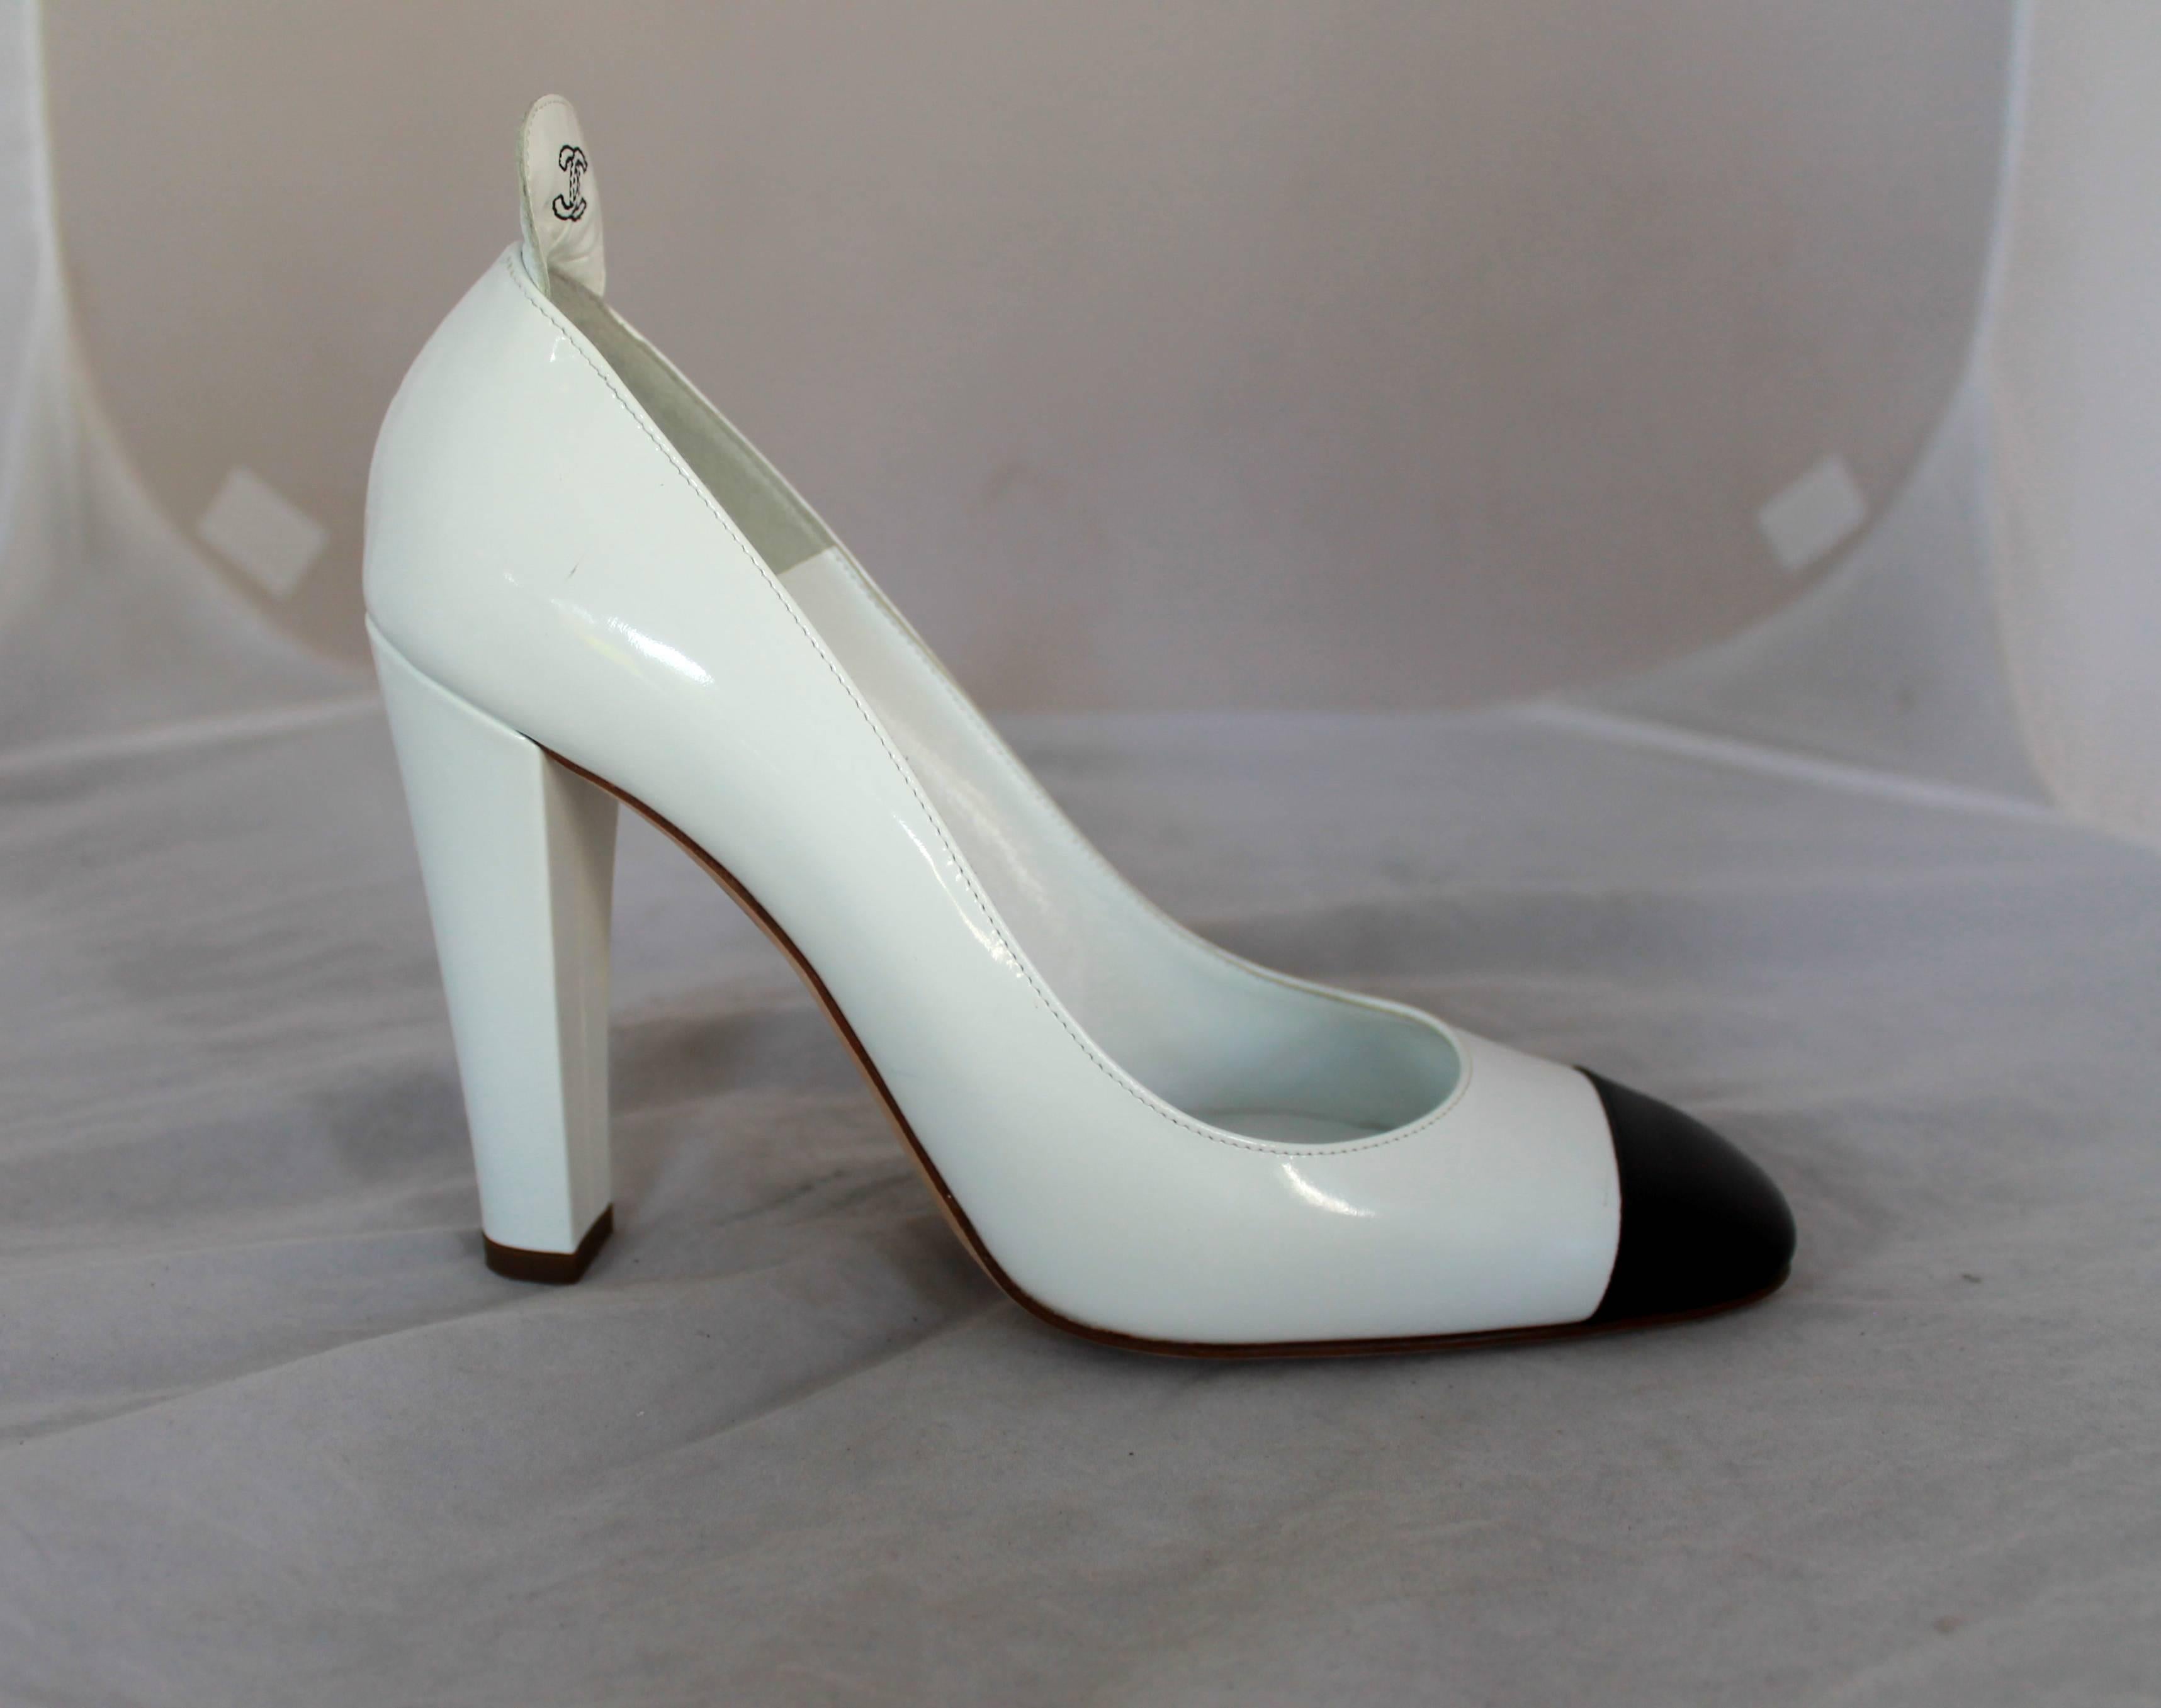 Chanel White Patent Pumps w/ Black Toe & Thicker Heel - 40.  These pumps are in excellent condition, they have minimal wear on the sole.  These pumps have a black patent toe and a back flap with black 